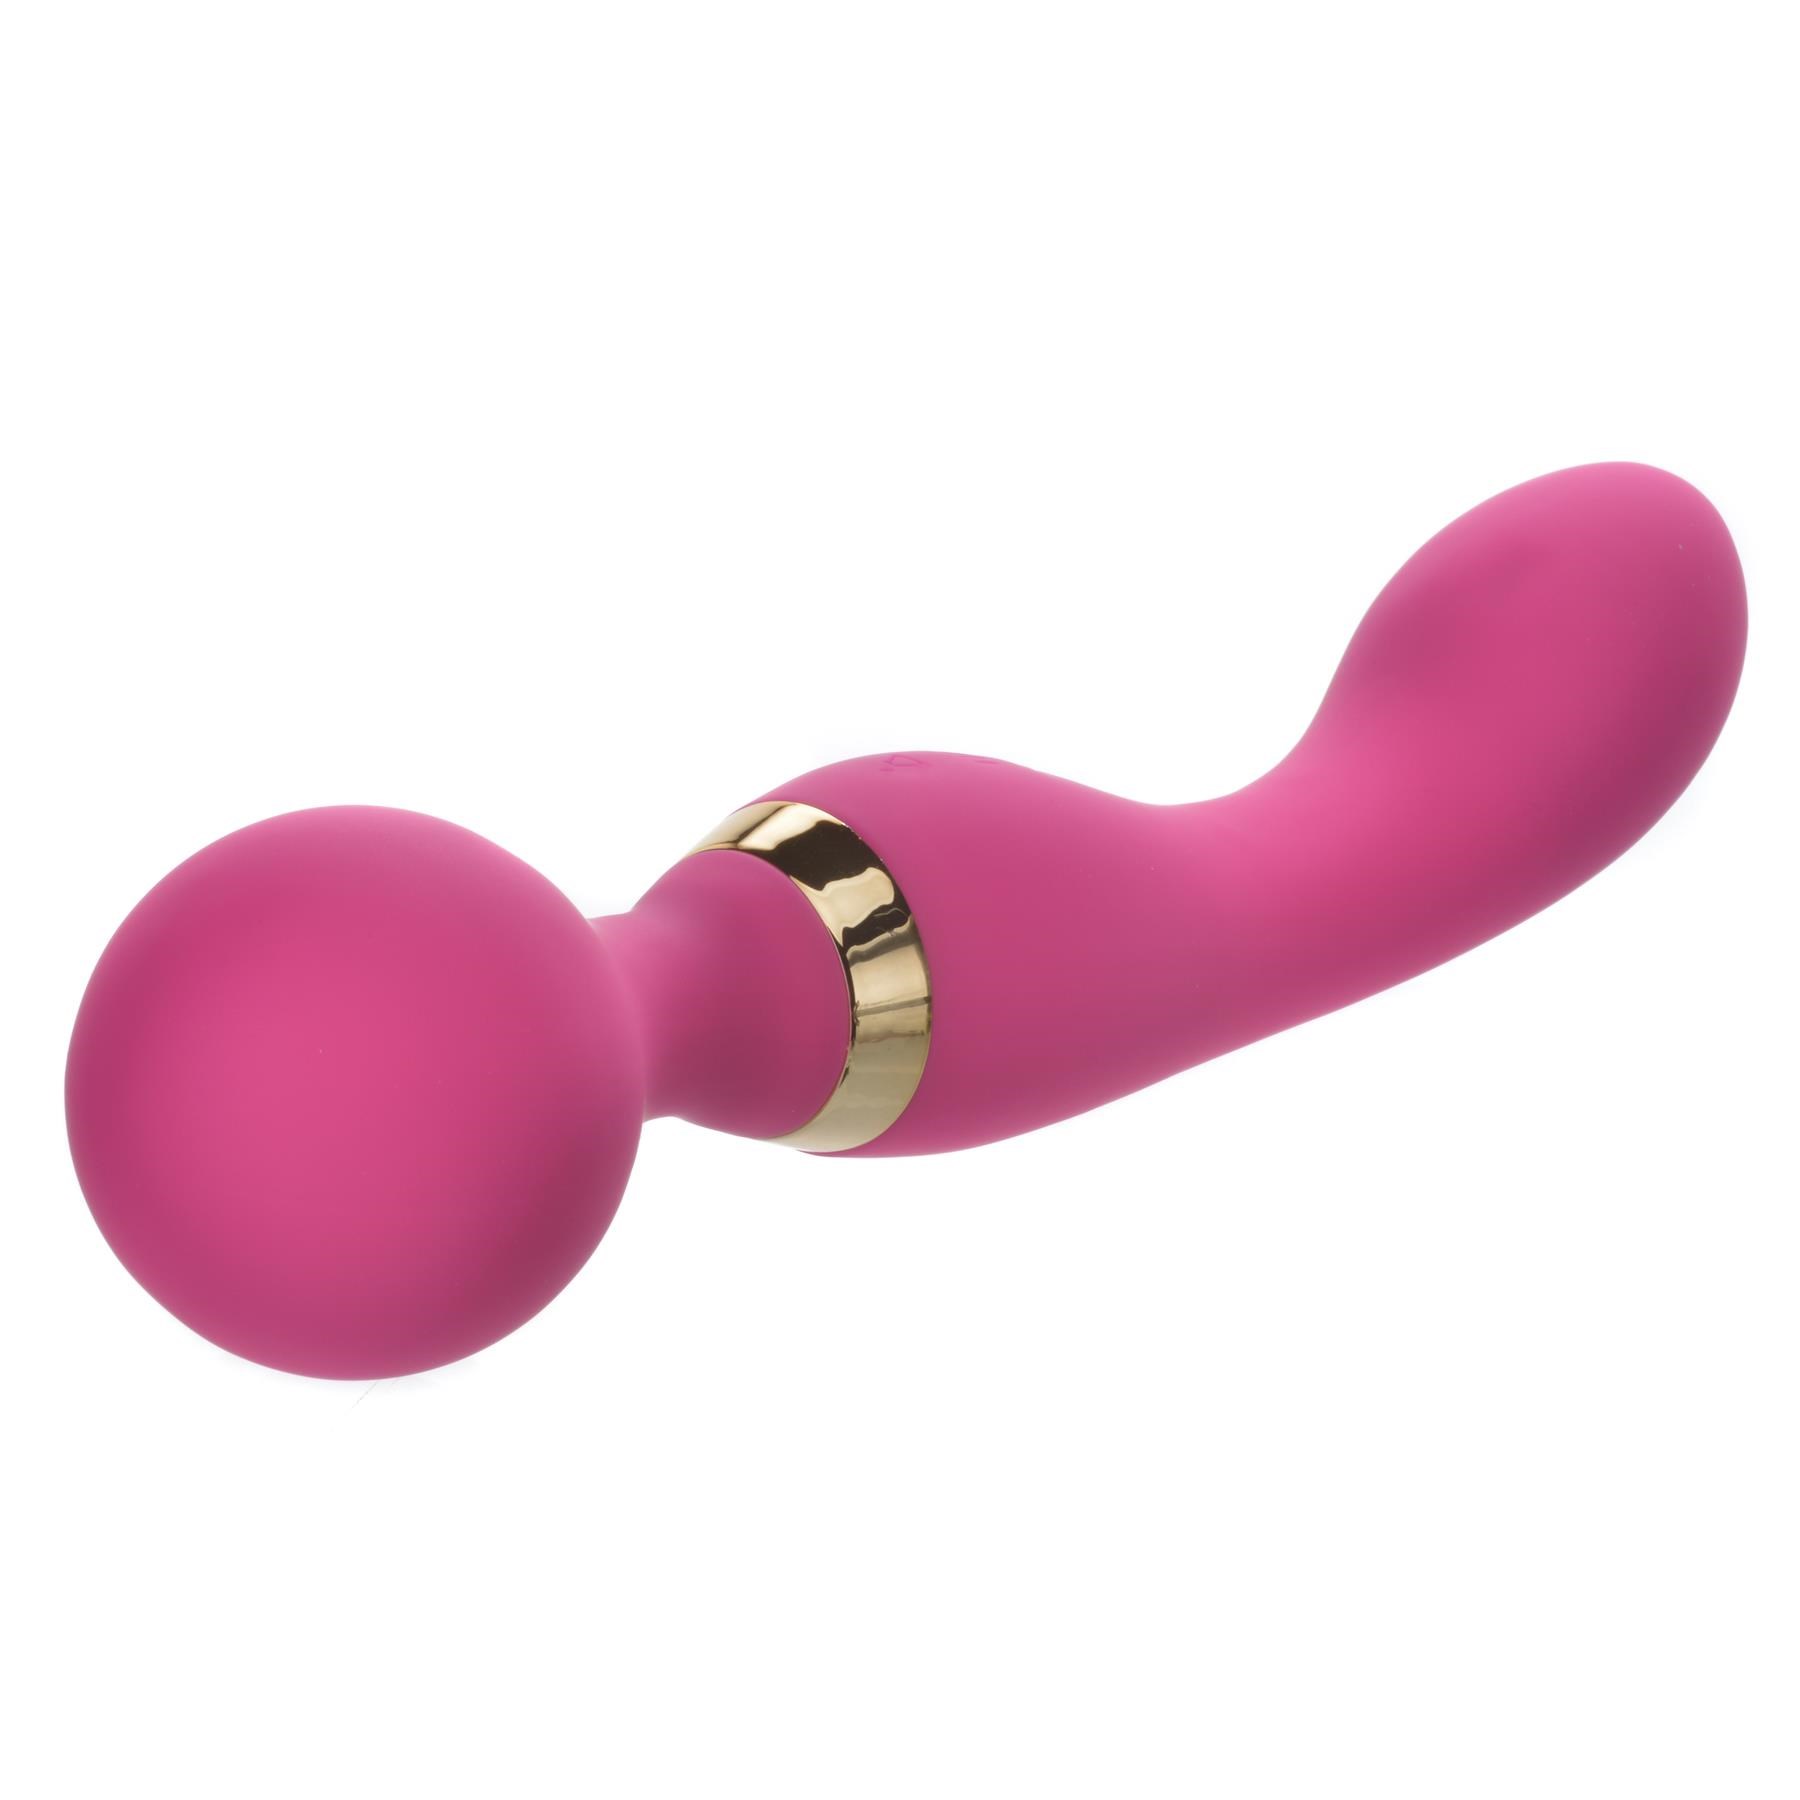 Dual Pleasures Rechargeable Wand Massager- Product Shot #3